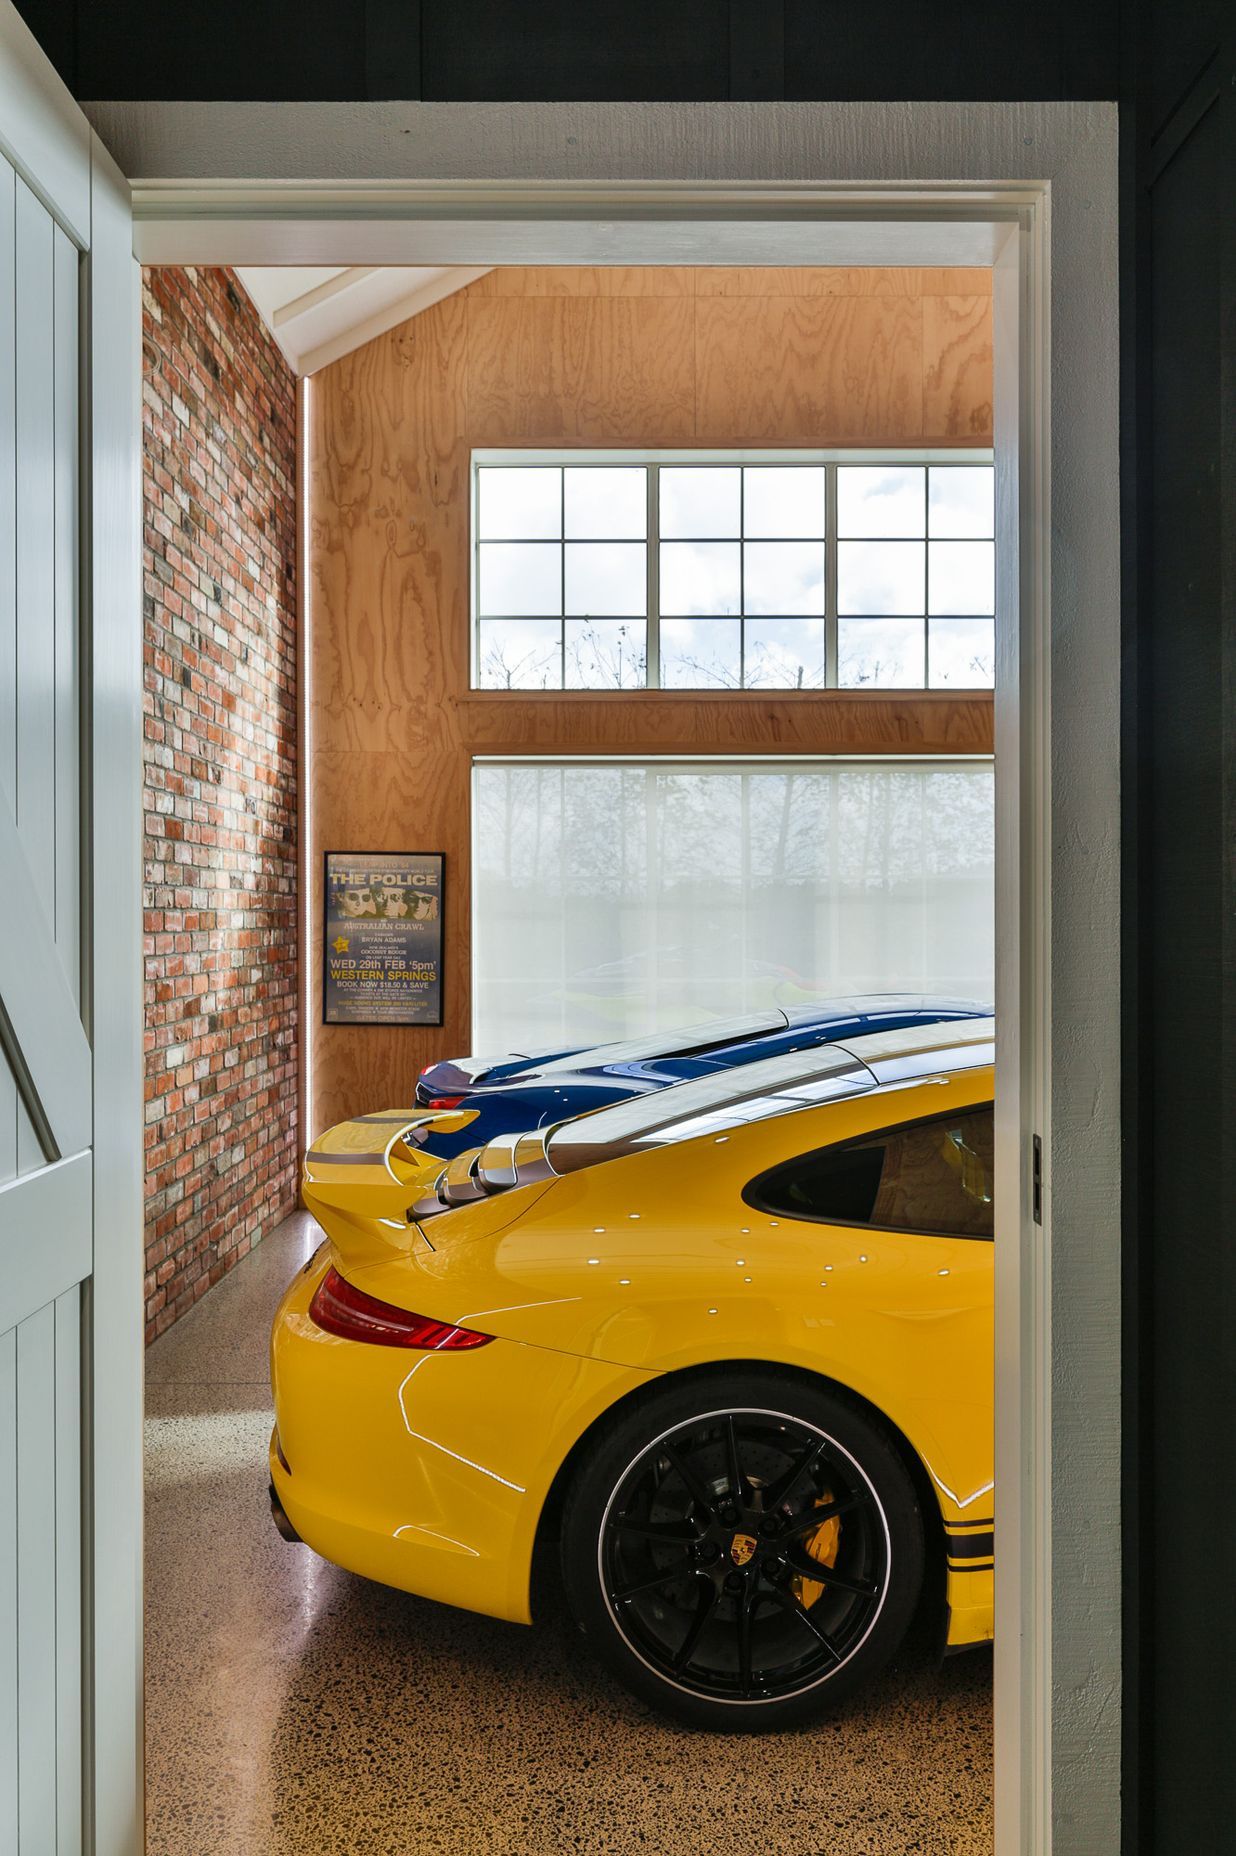 One of the entrances into the garage.